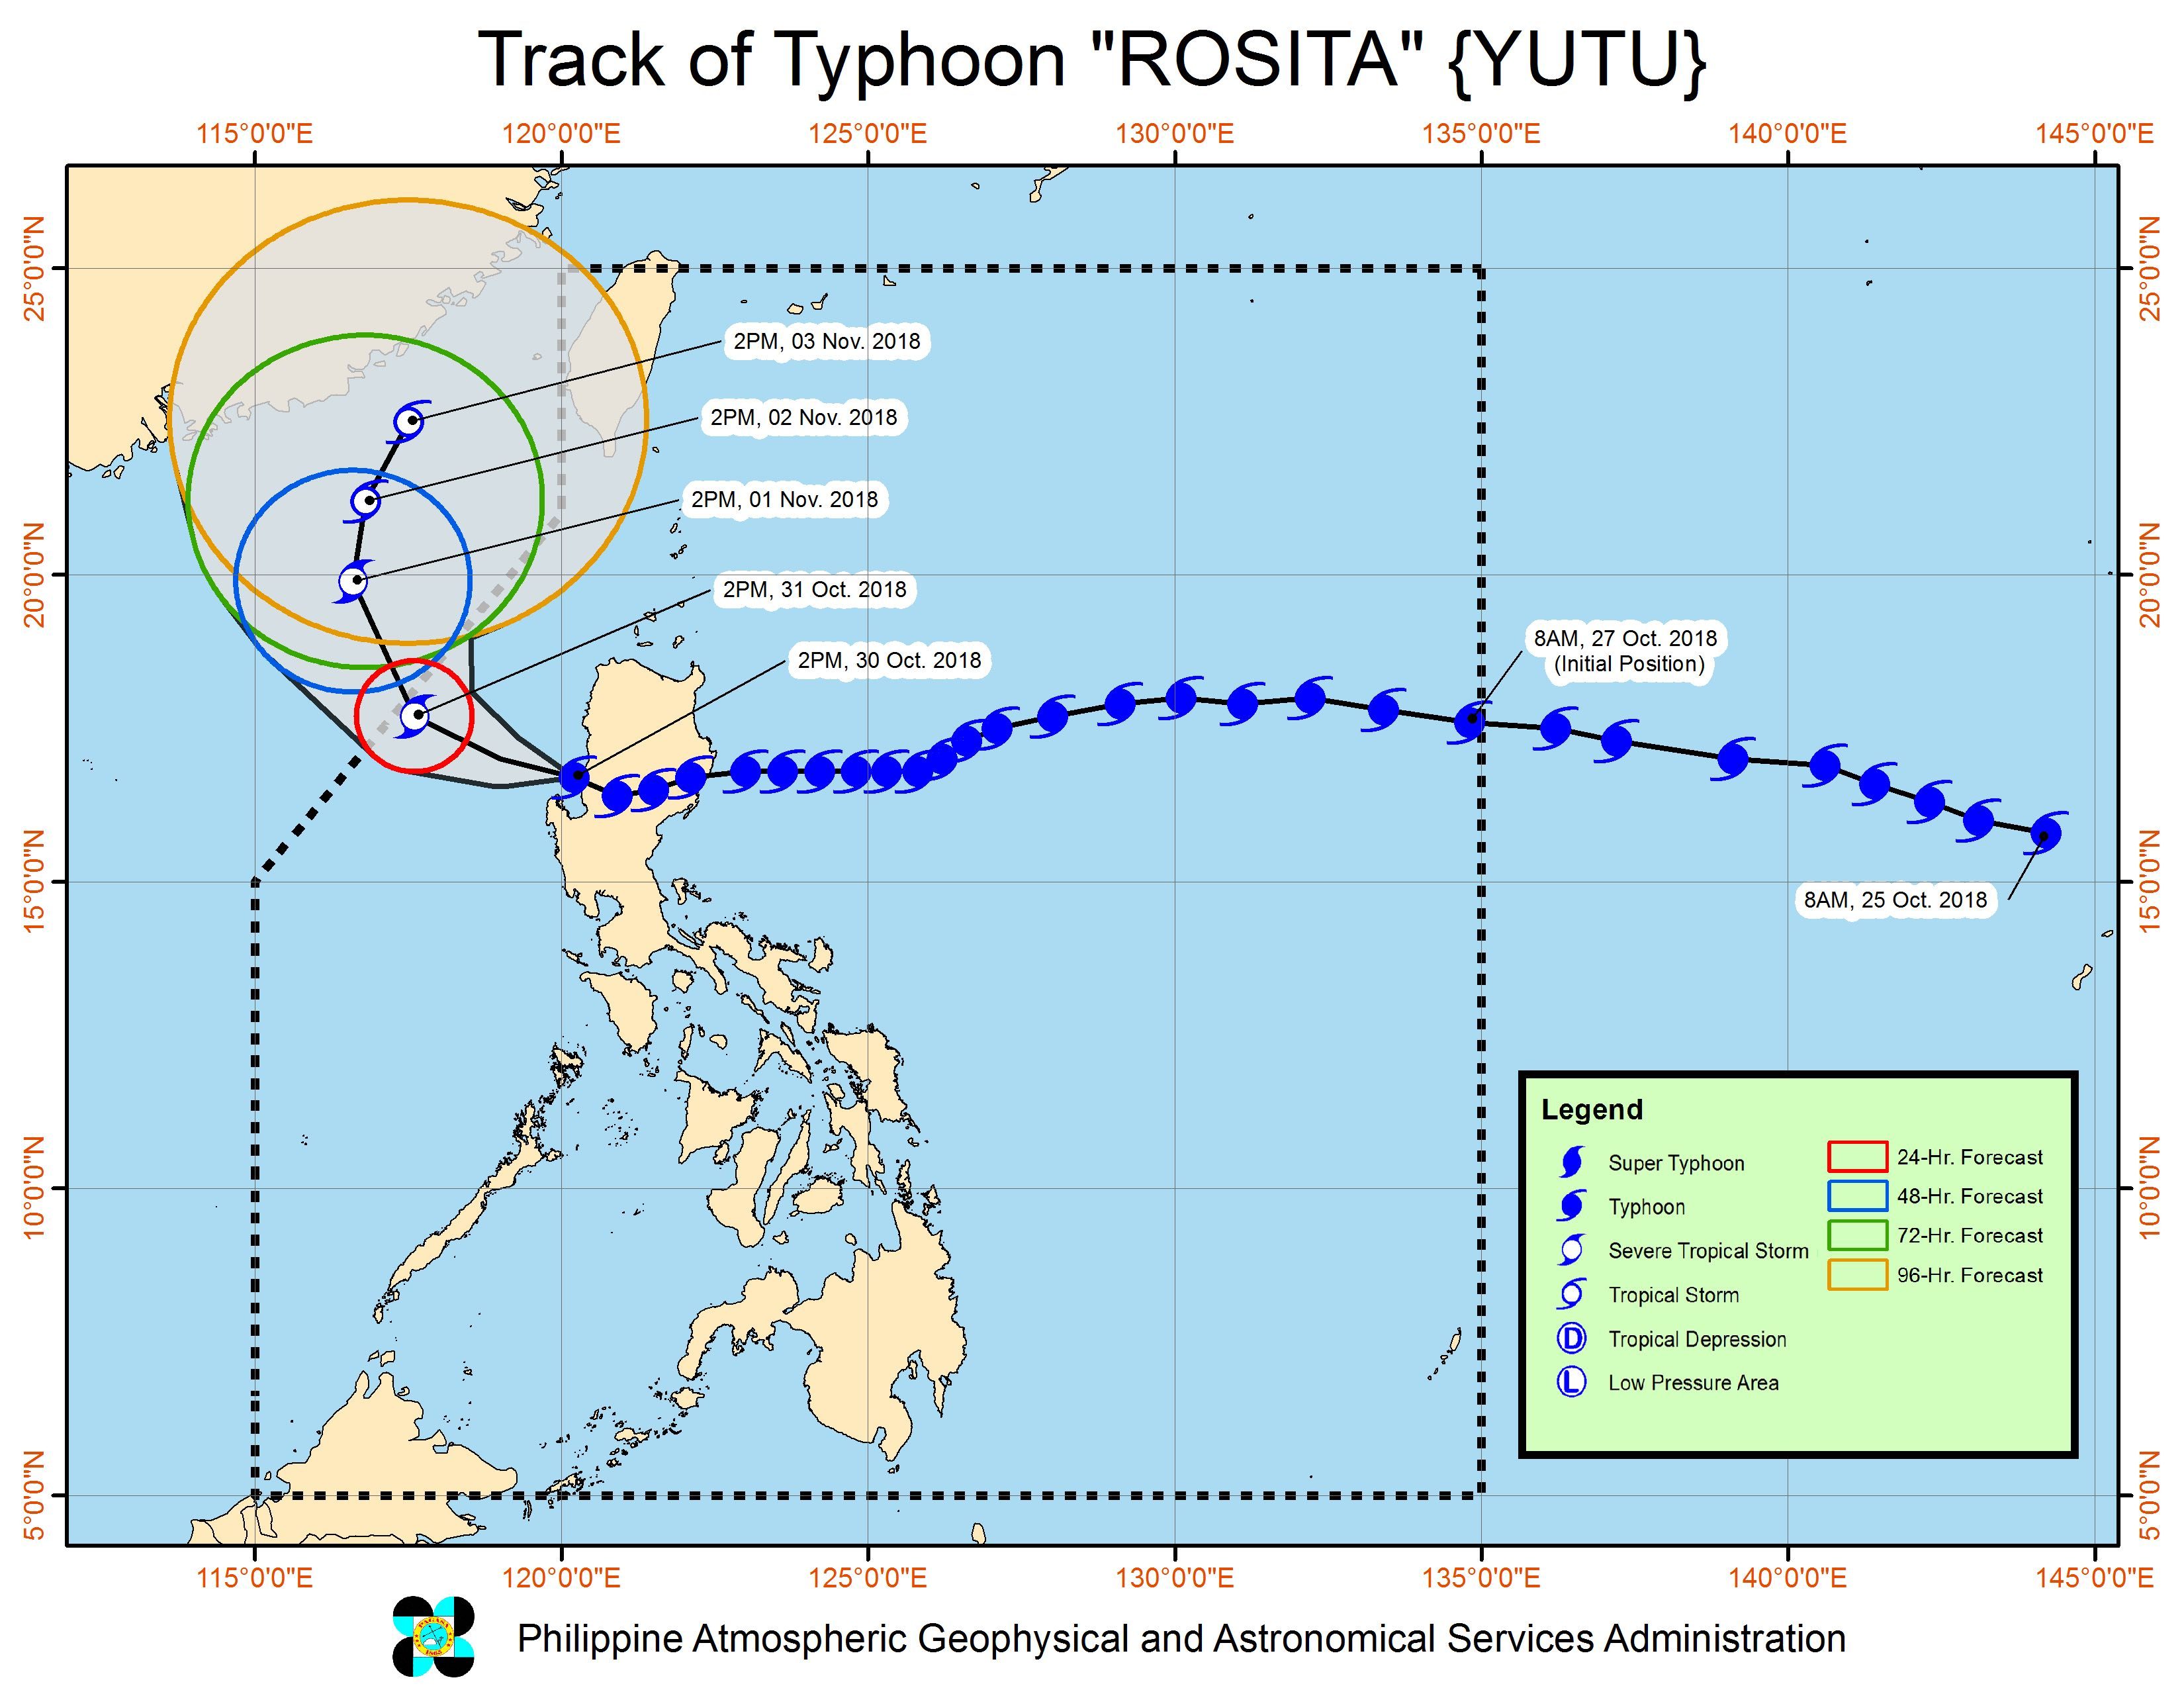 Forecast track of Typhoon Rosita (Yutu) as of October 30, 2018, 5 pm. Image from PAGASA 